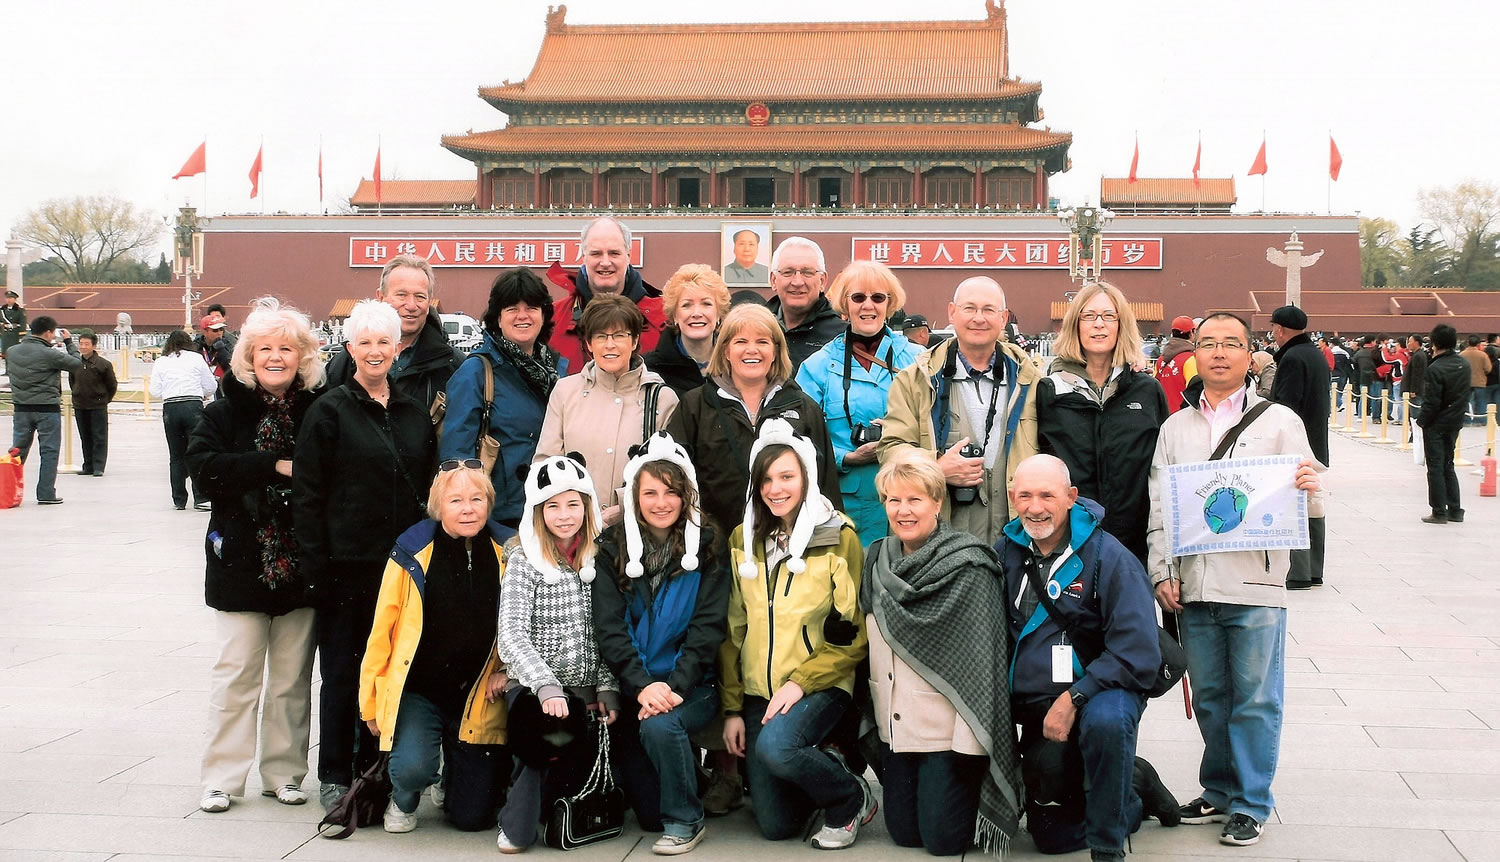 Friendly Planet Travel participants pose in Tiananmen Square in Beijing.